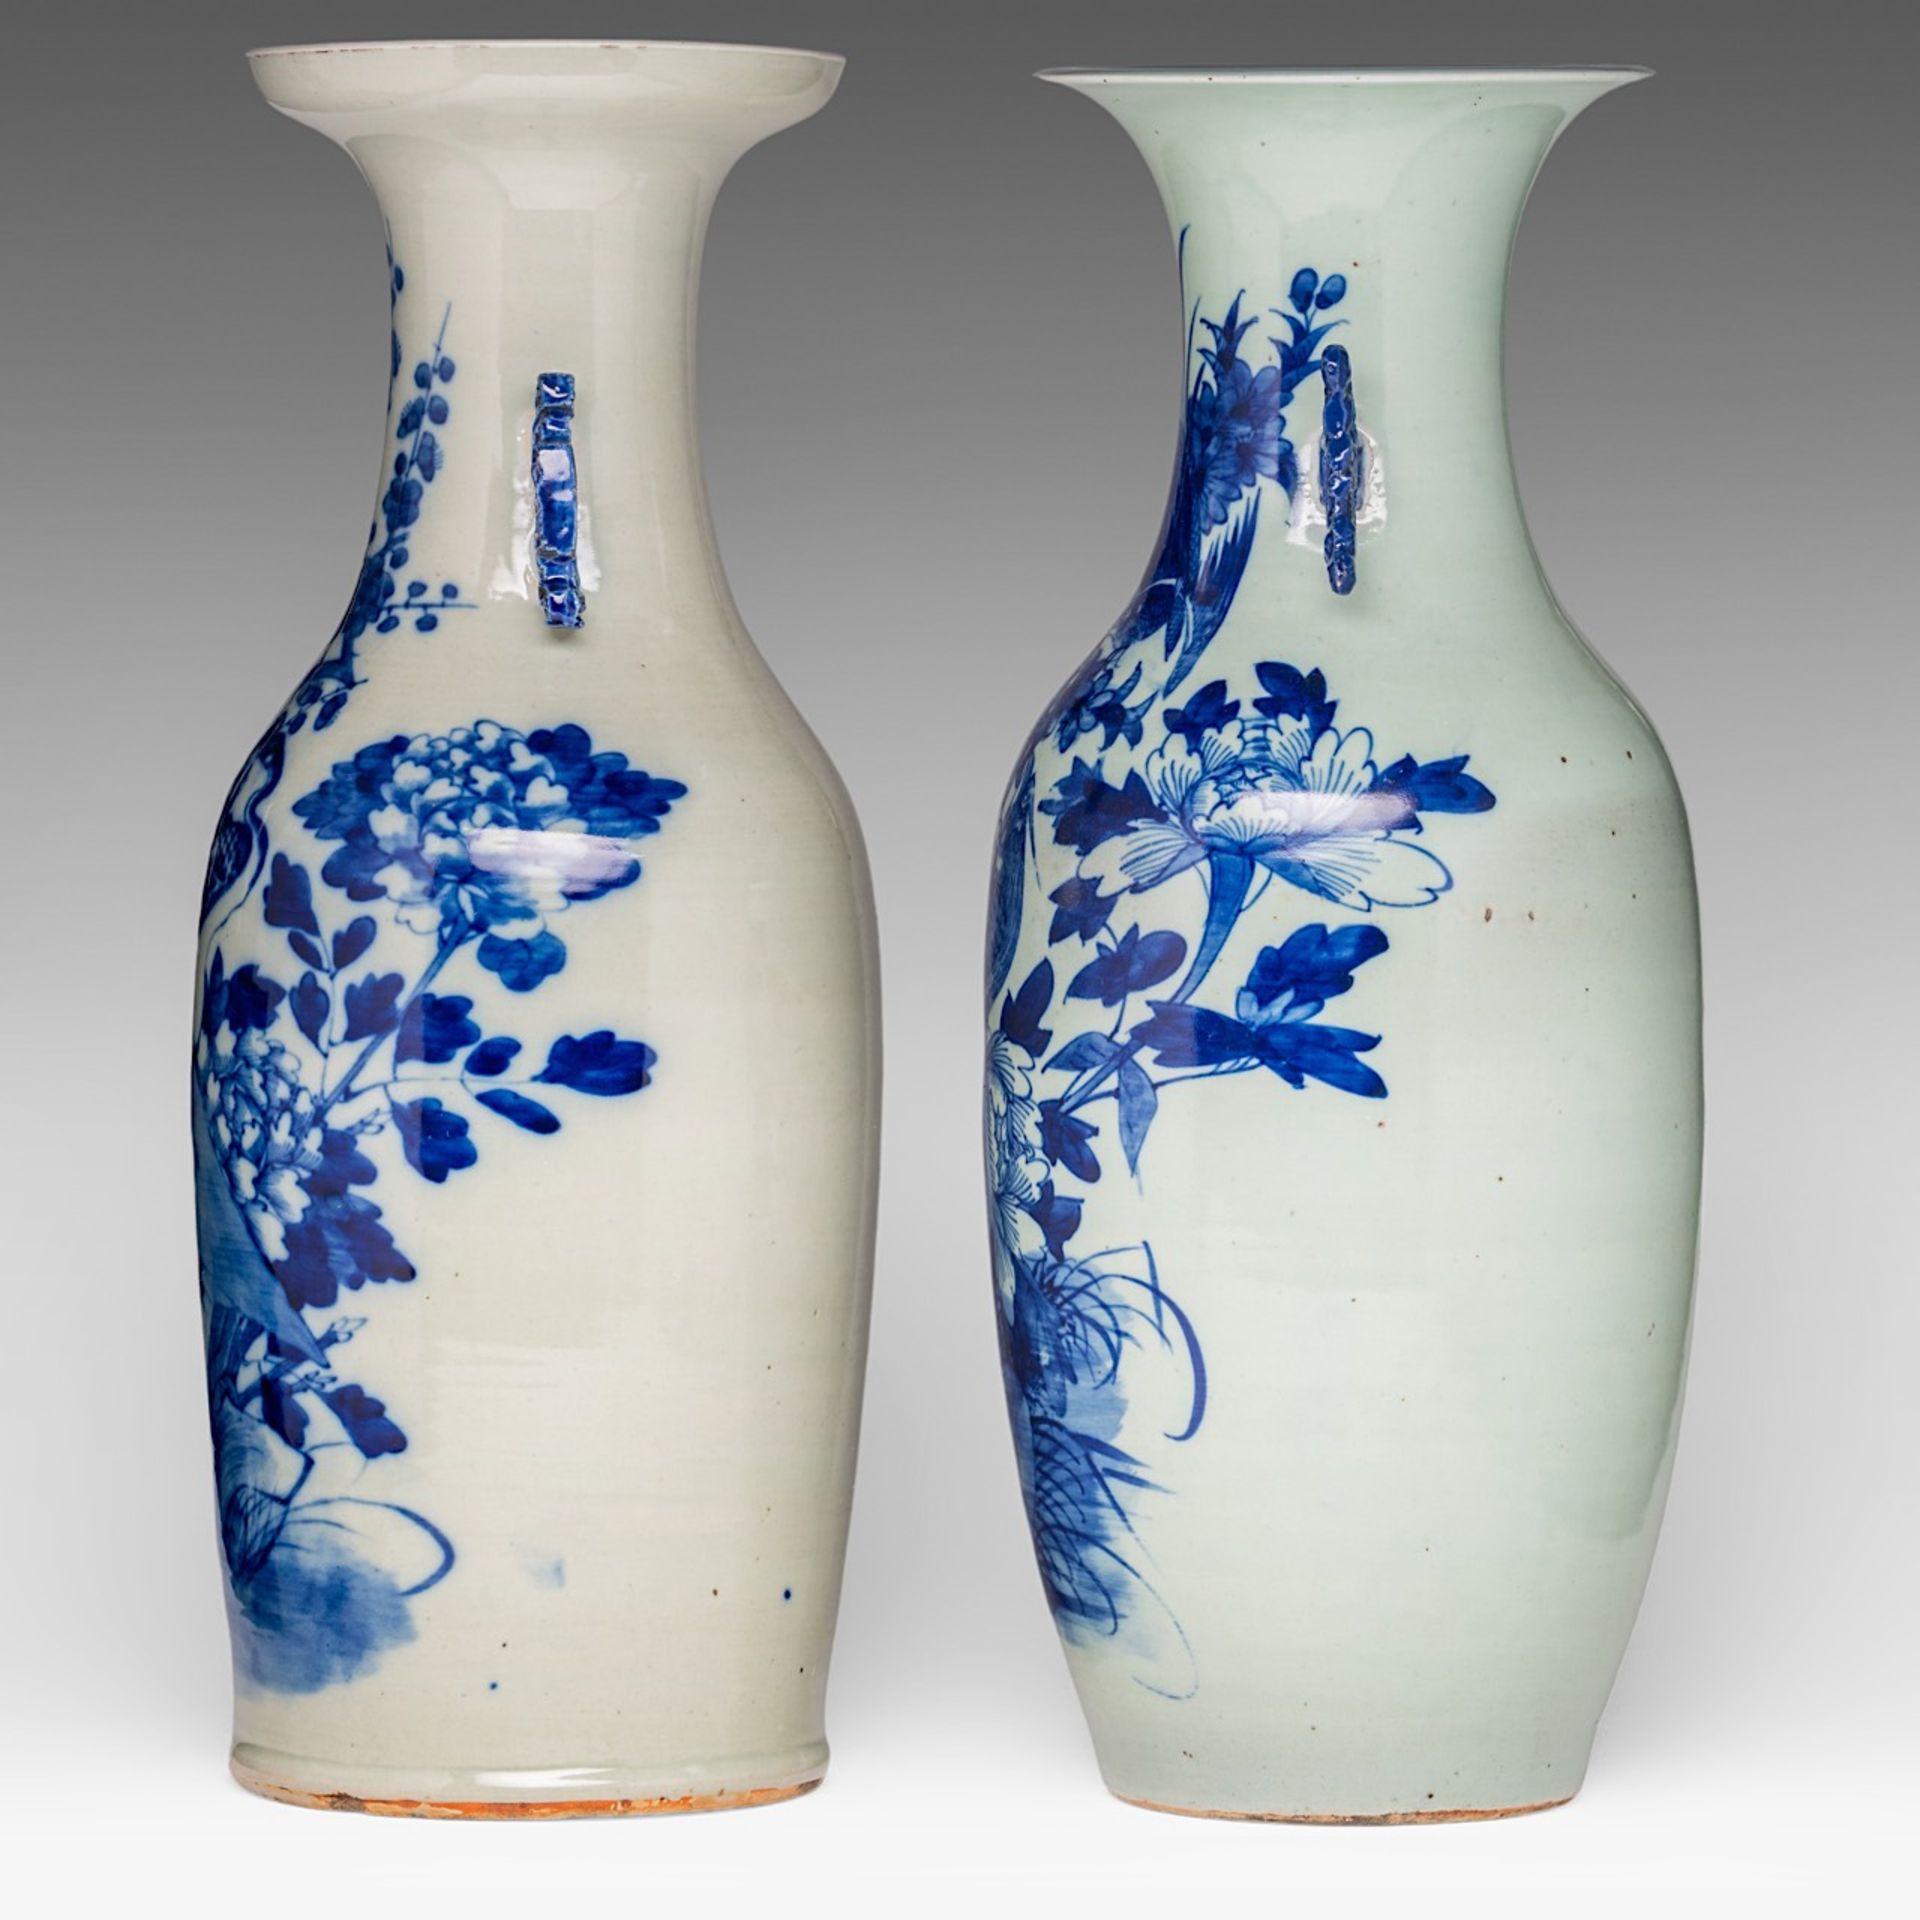 Four Chinese blue and white on celadon ground 'Flowers and birds' vases, late 19thC, H 57 - 58 cm - Image 7 of 13